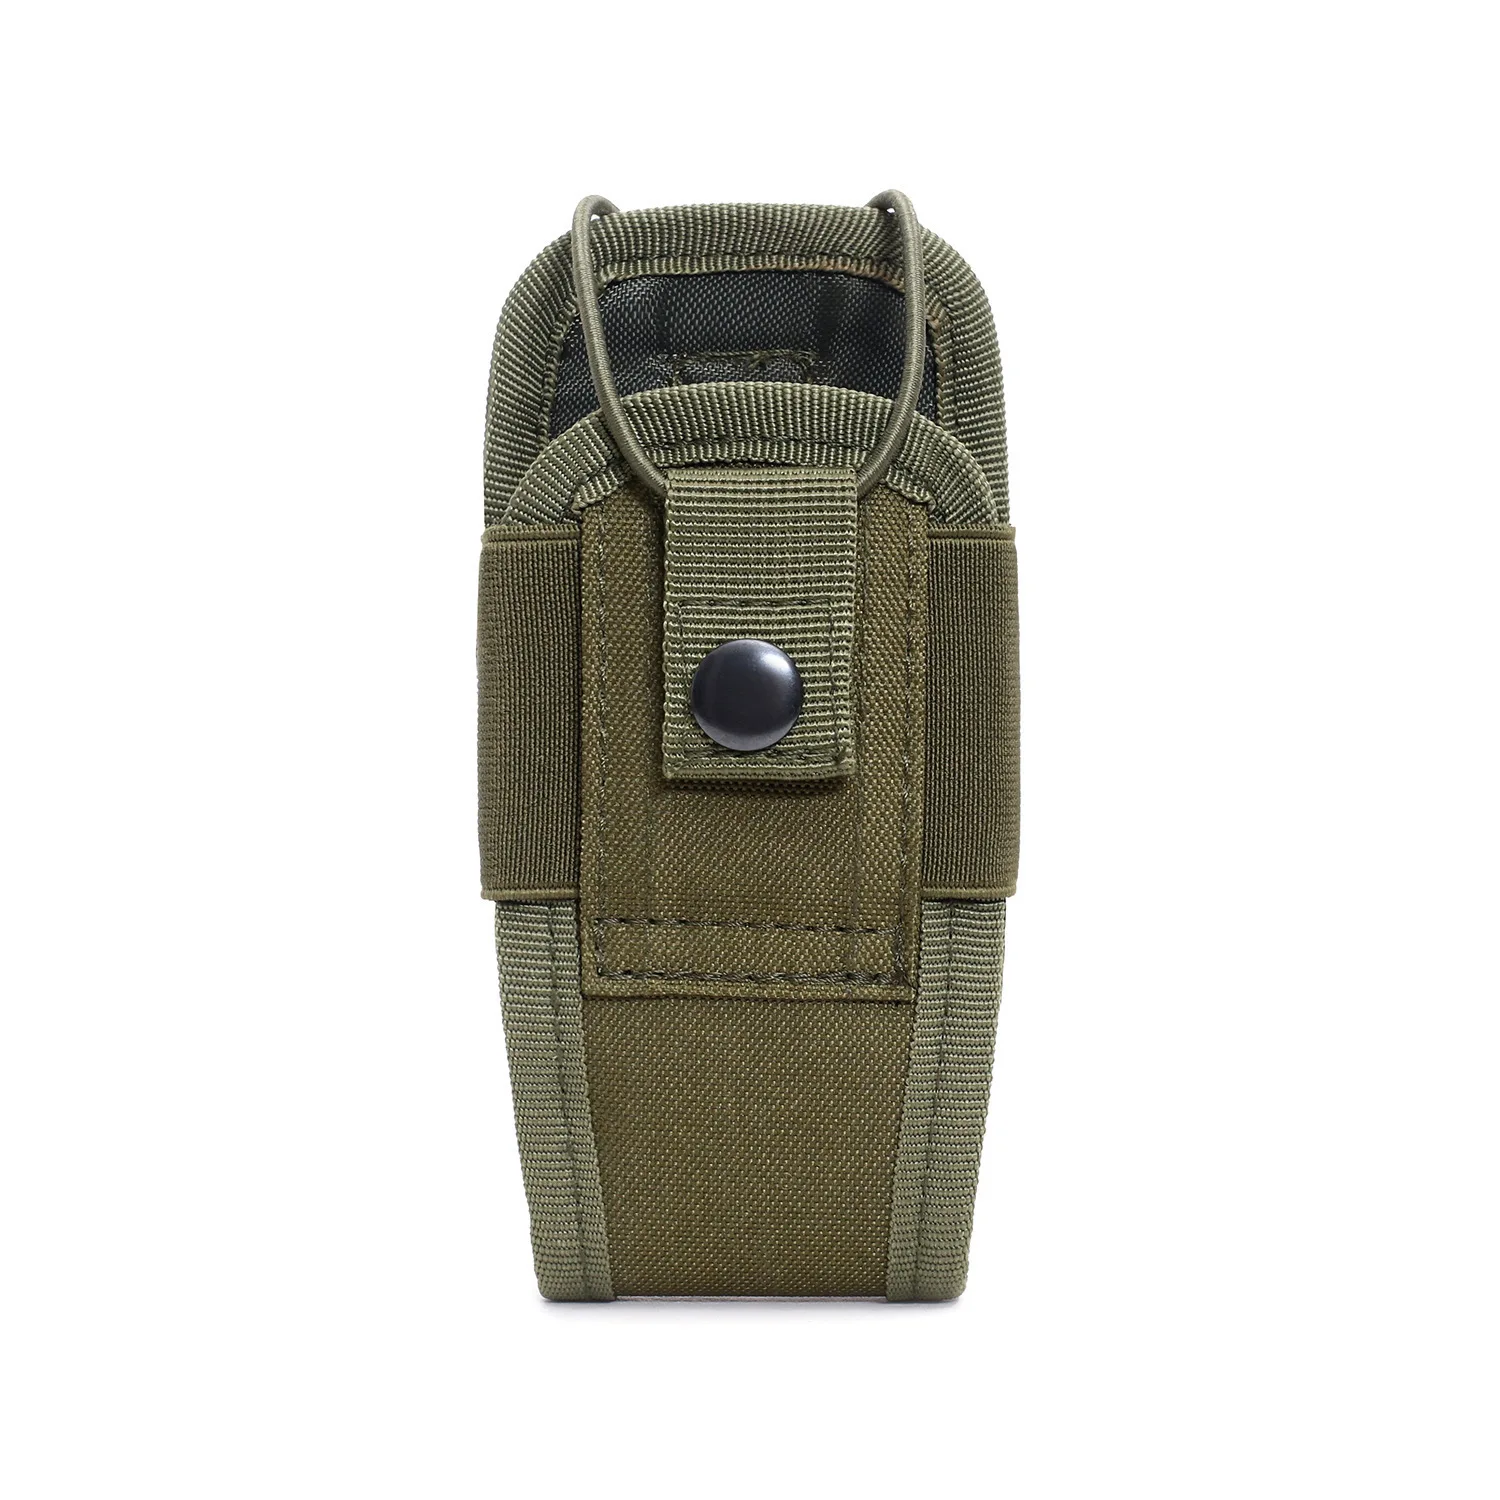 Talkie pendant camping hunting interphone holster army magazine pouch package talkiebag thumb200